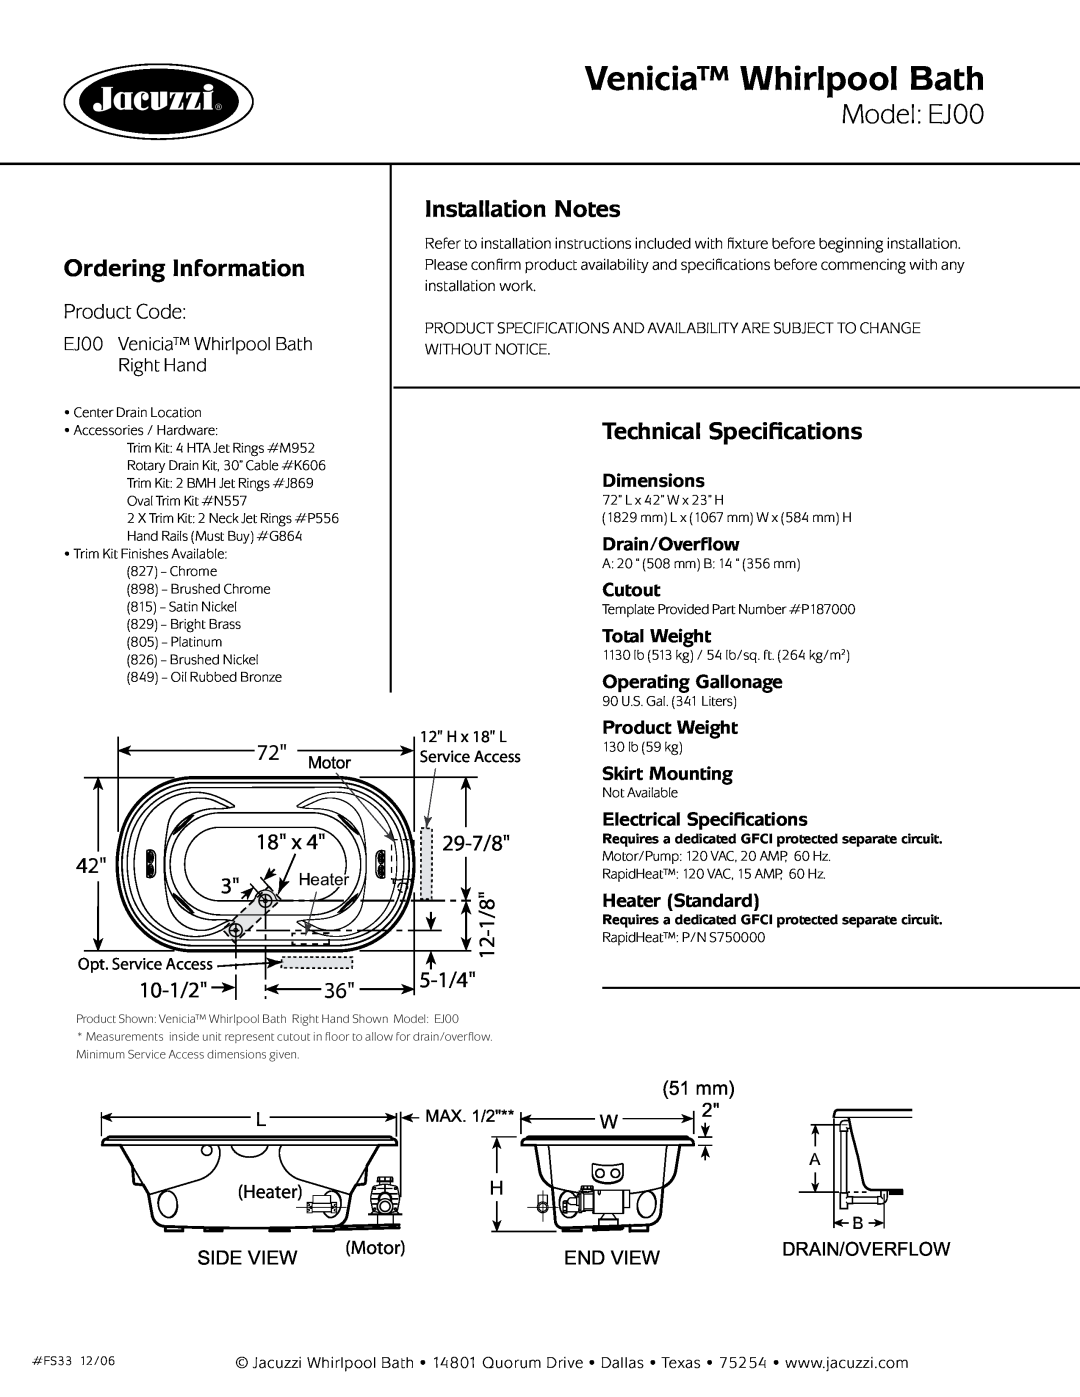 Jacuzzi Venicia Whirlpool Bath, Model EJ00, Ordering Information, Installation Notes, Technical Specifications, 29-7/8 